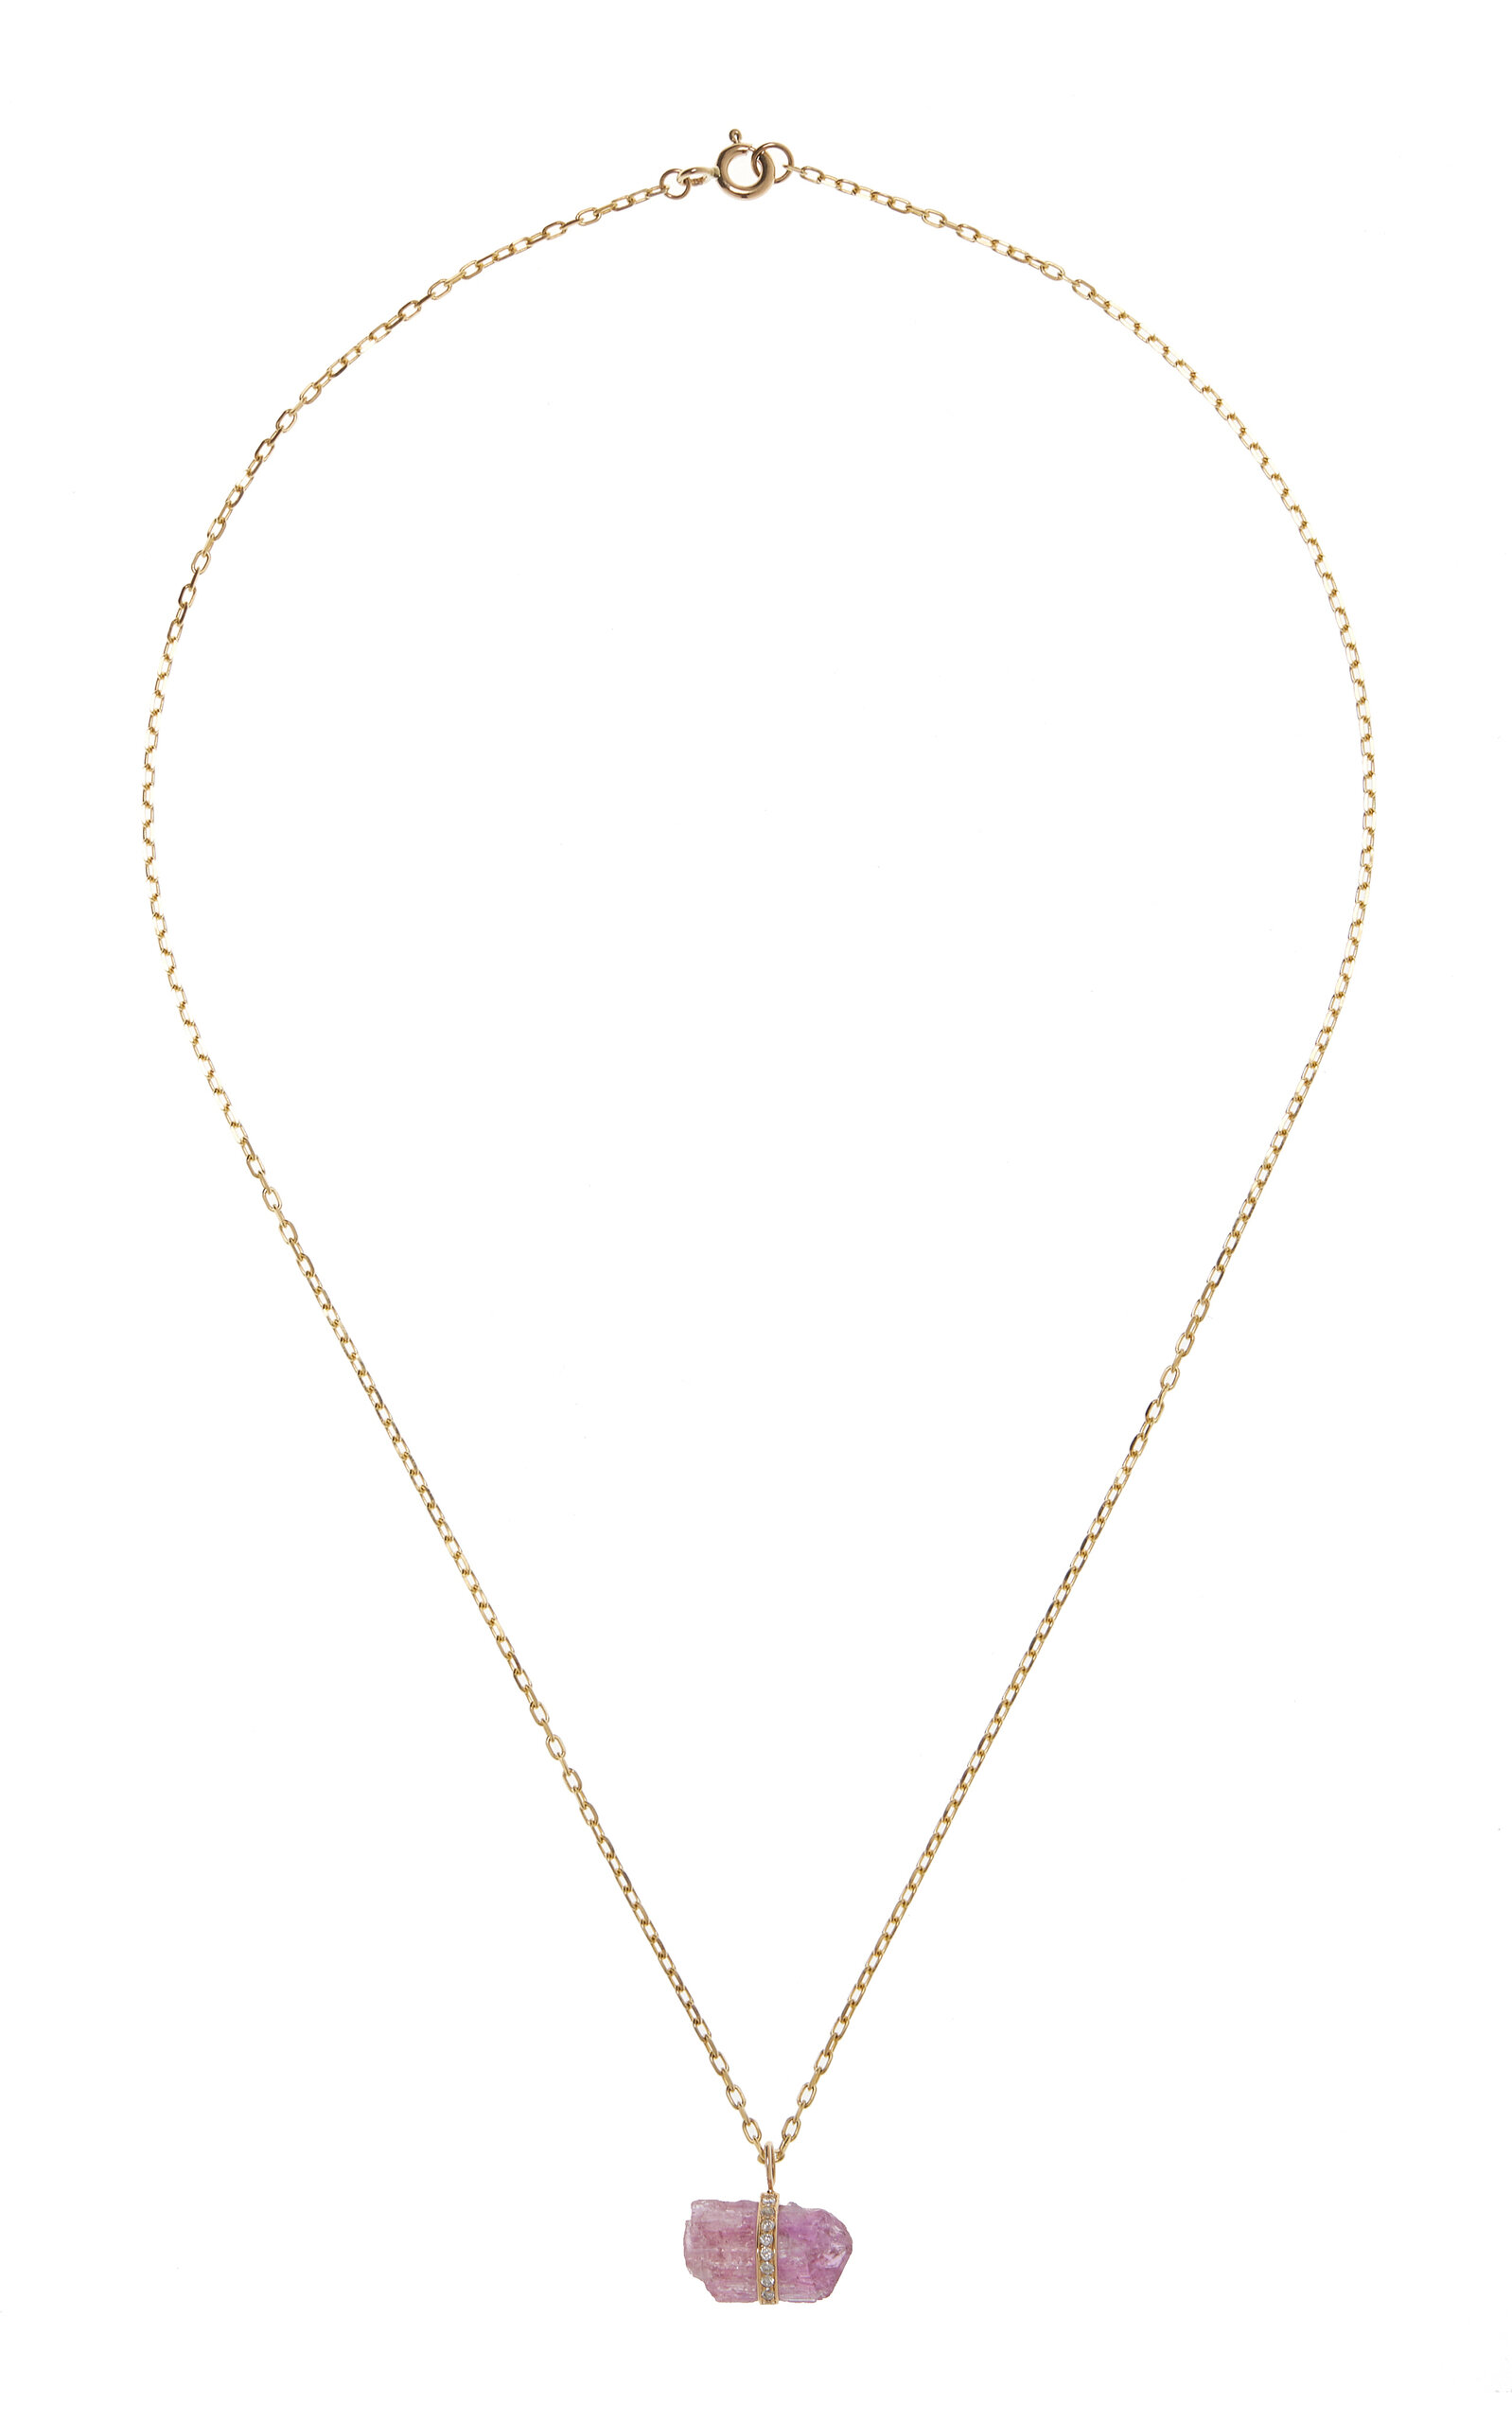 Jia Jia 14k Yellow Gold Topaz And Diamond Necklace In Pink